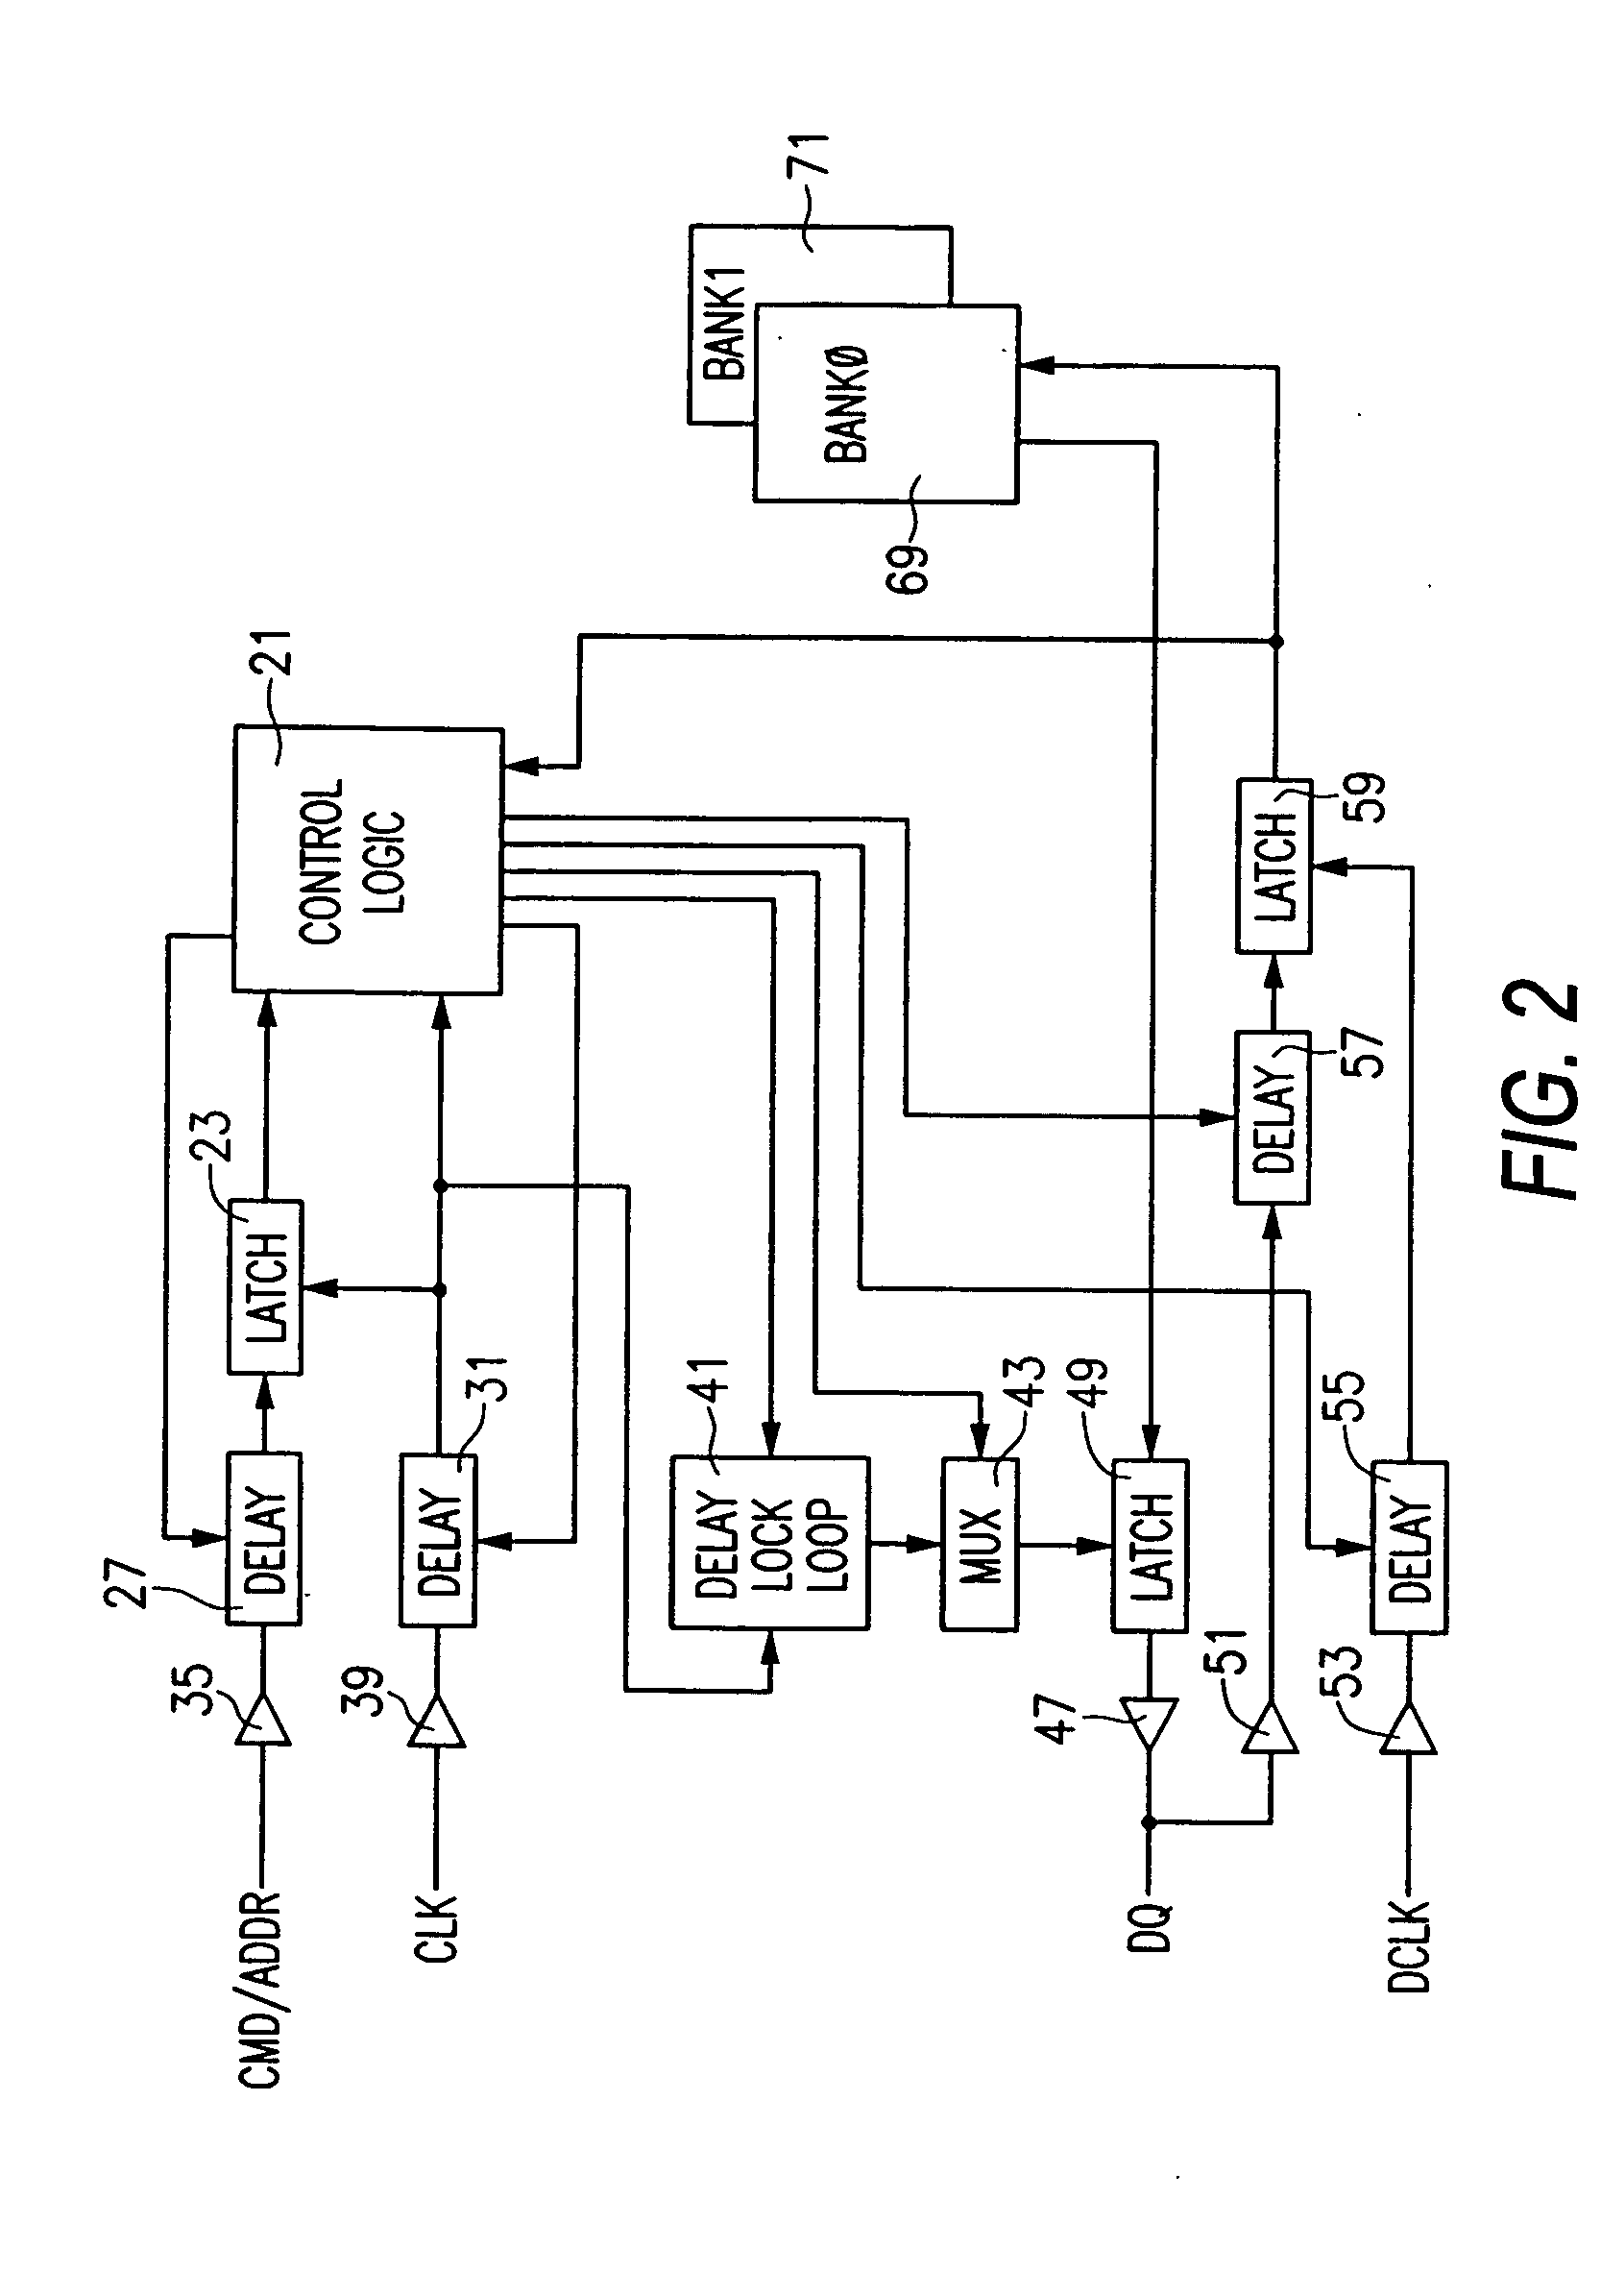 Method of timing calibration using slower data rate pattern